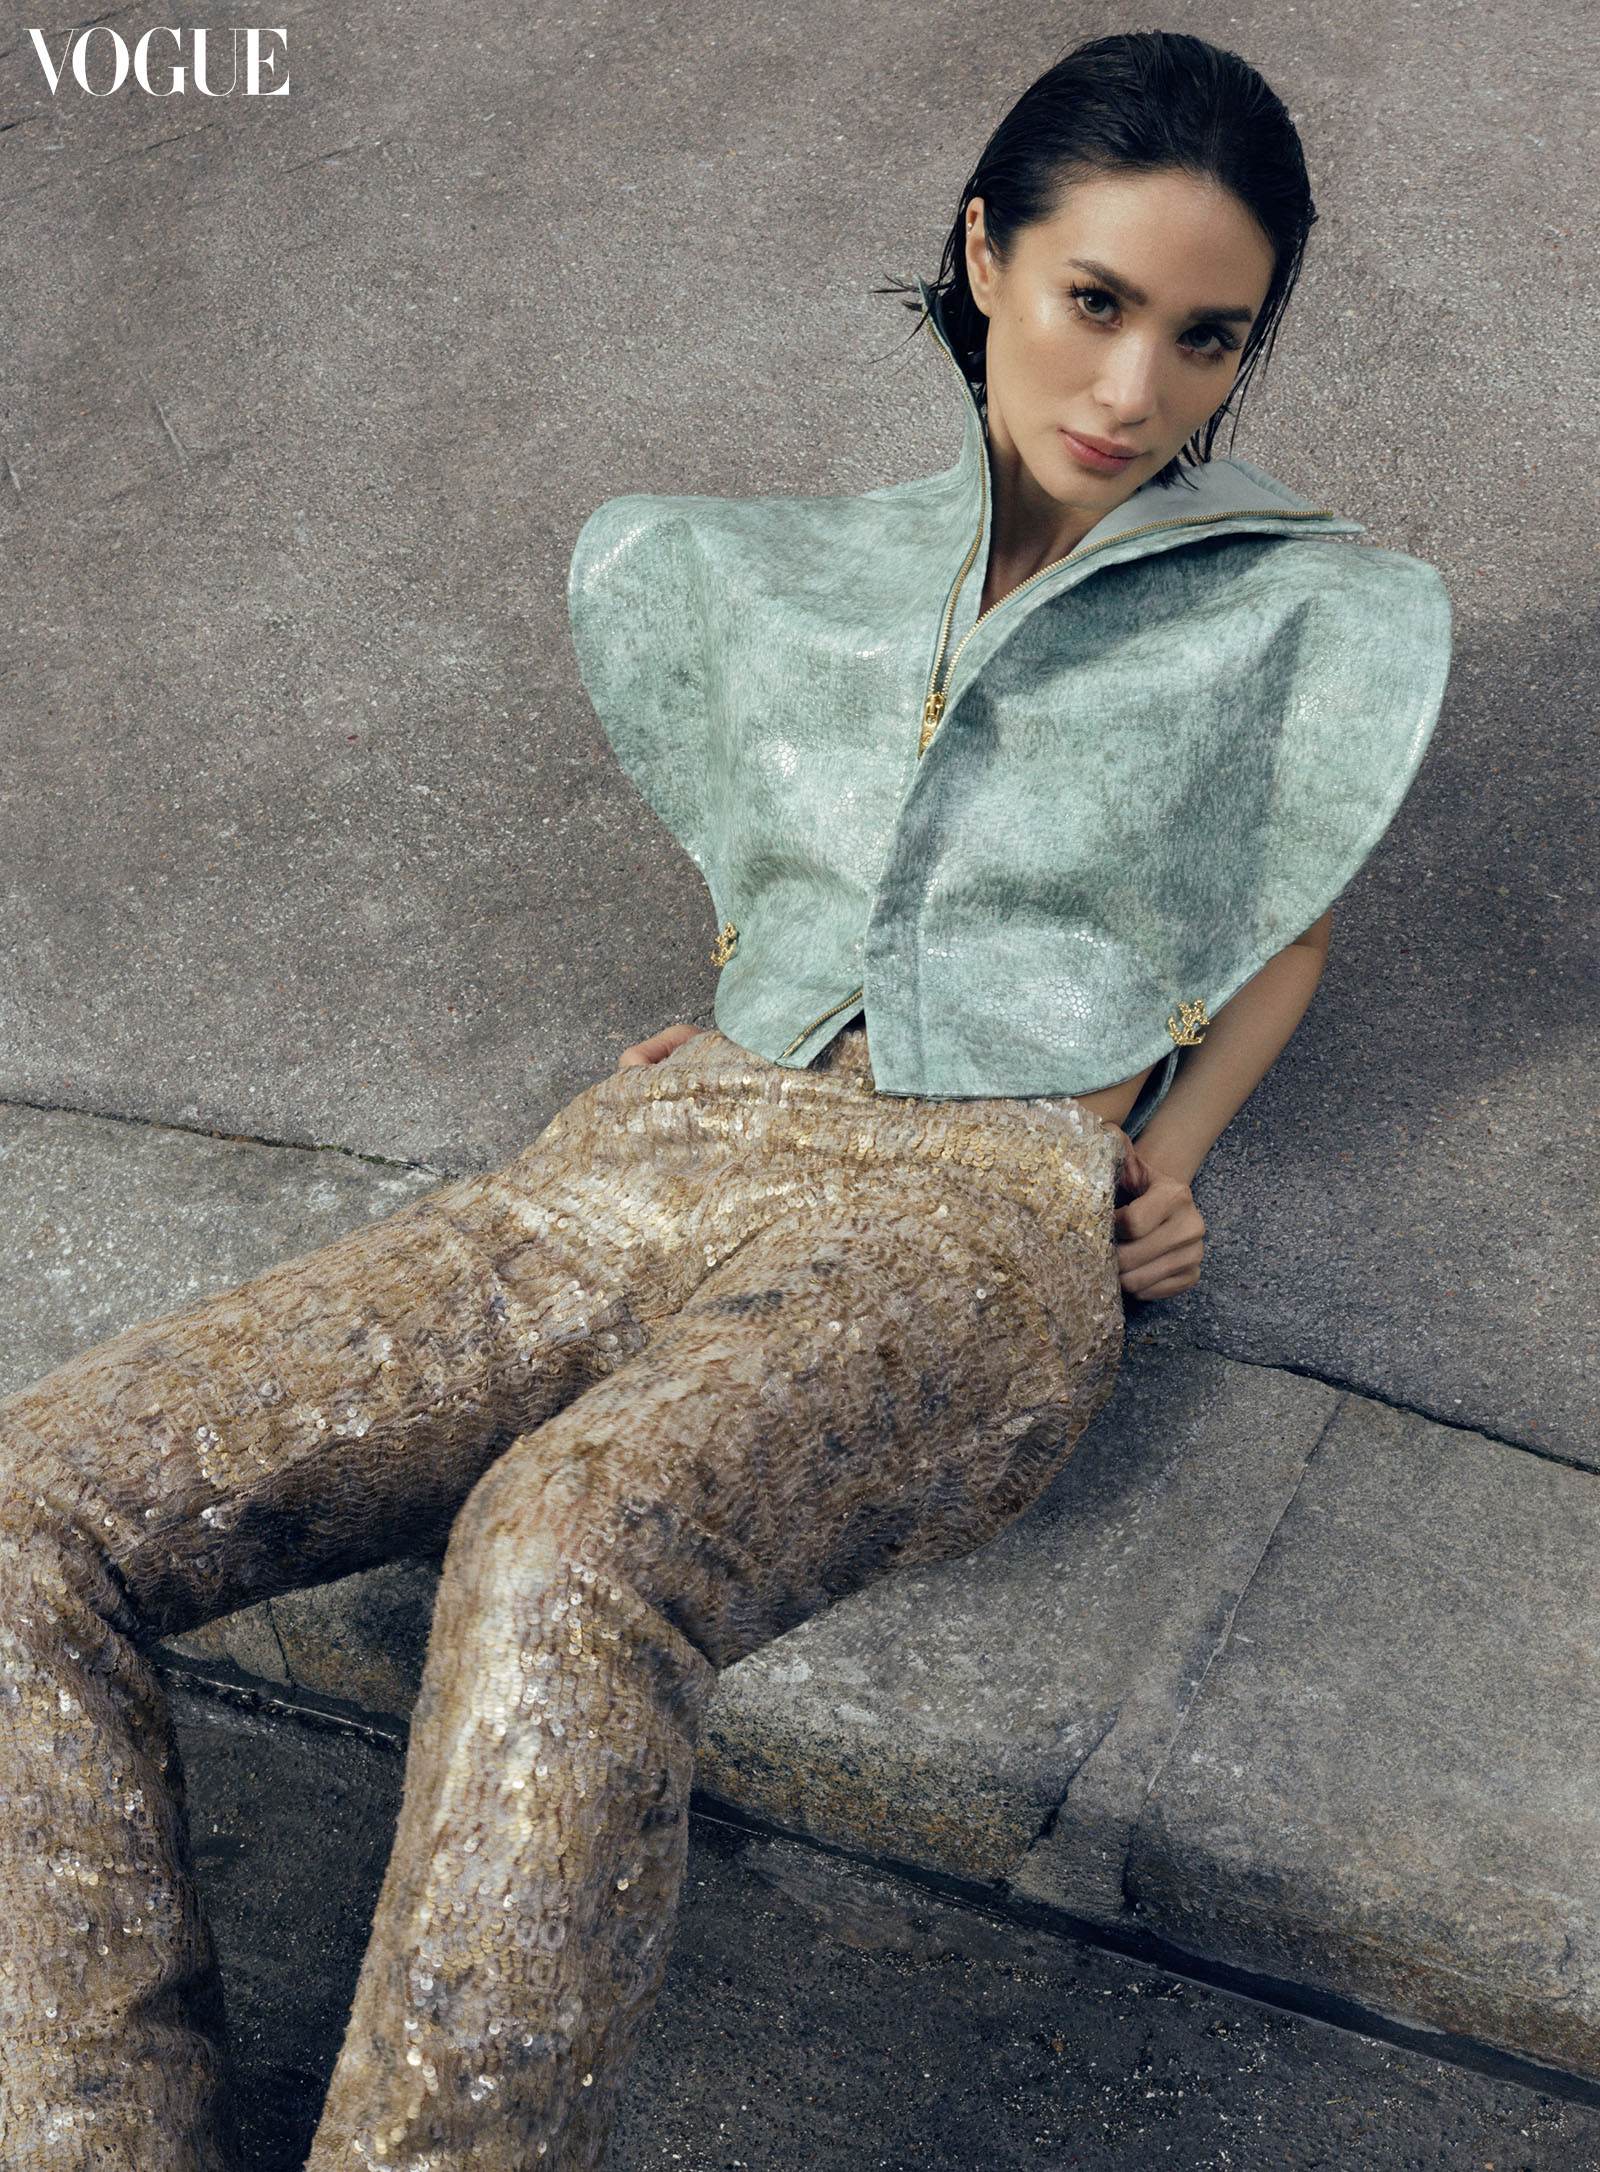 Heart Evangelista wearing a Louis Vuitton shagreen circle blouse and embellished trousers with a building pattern.